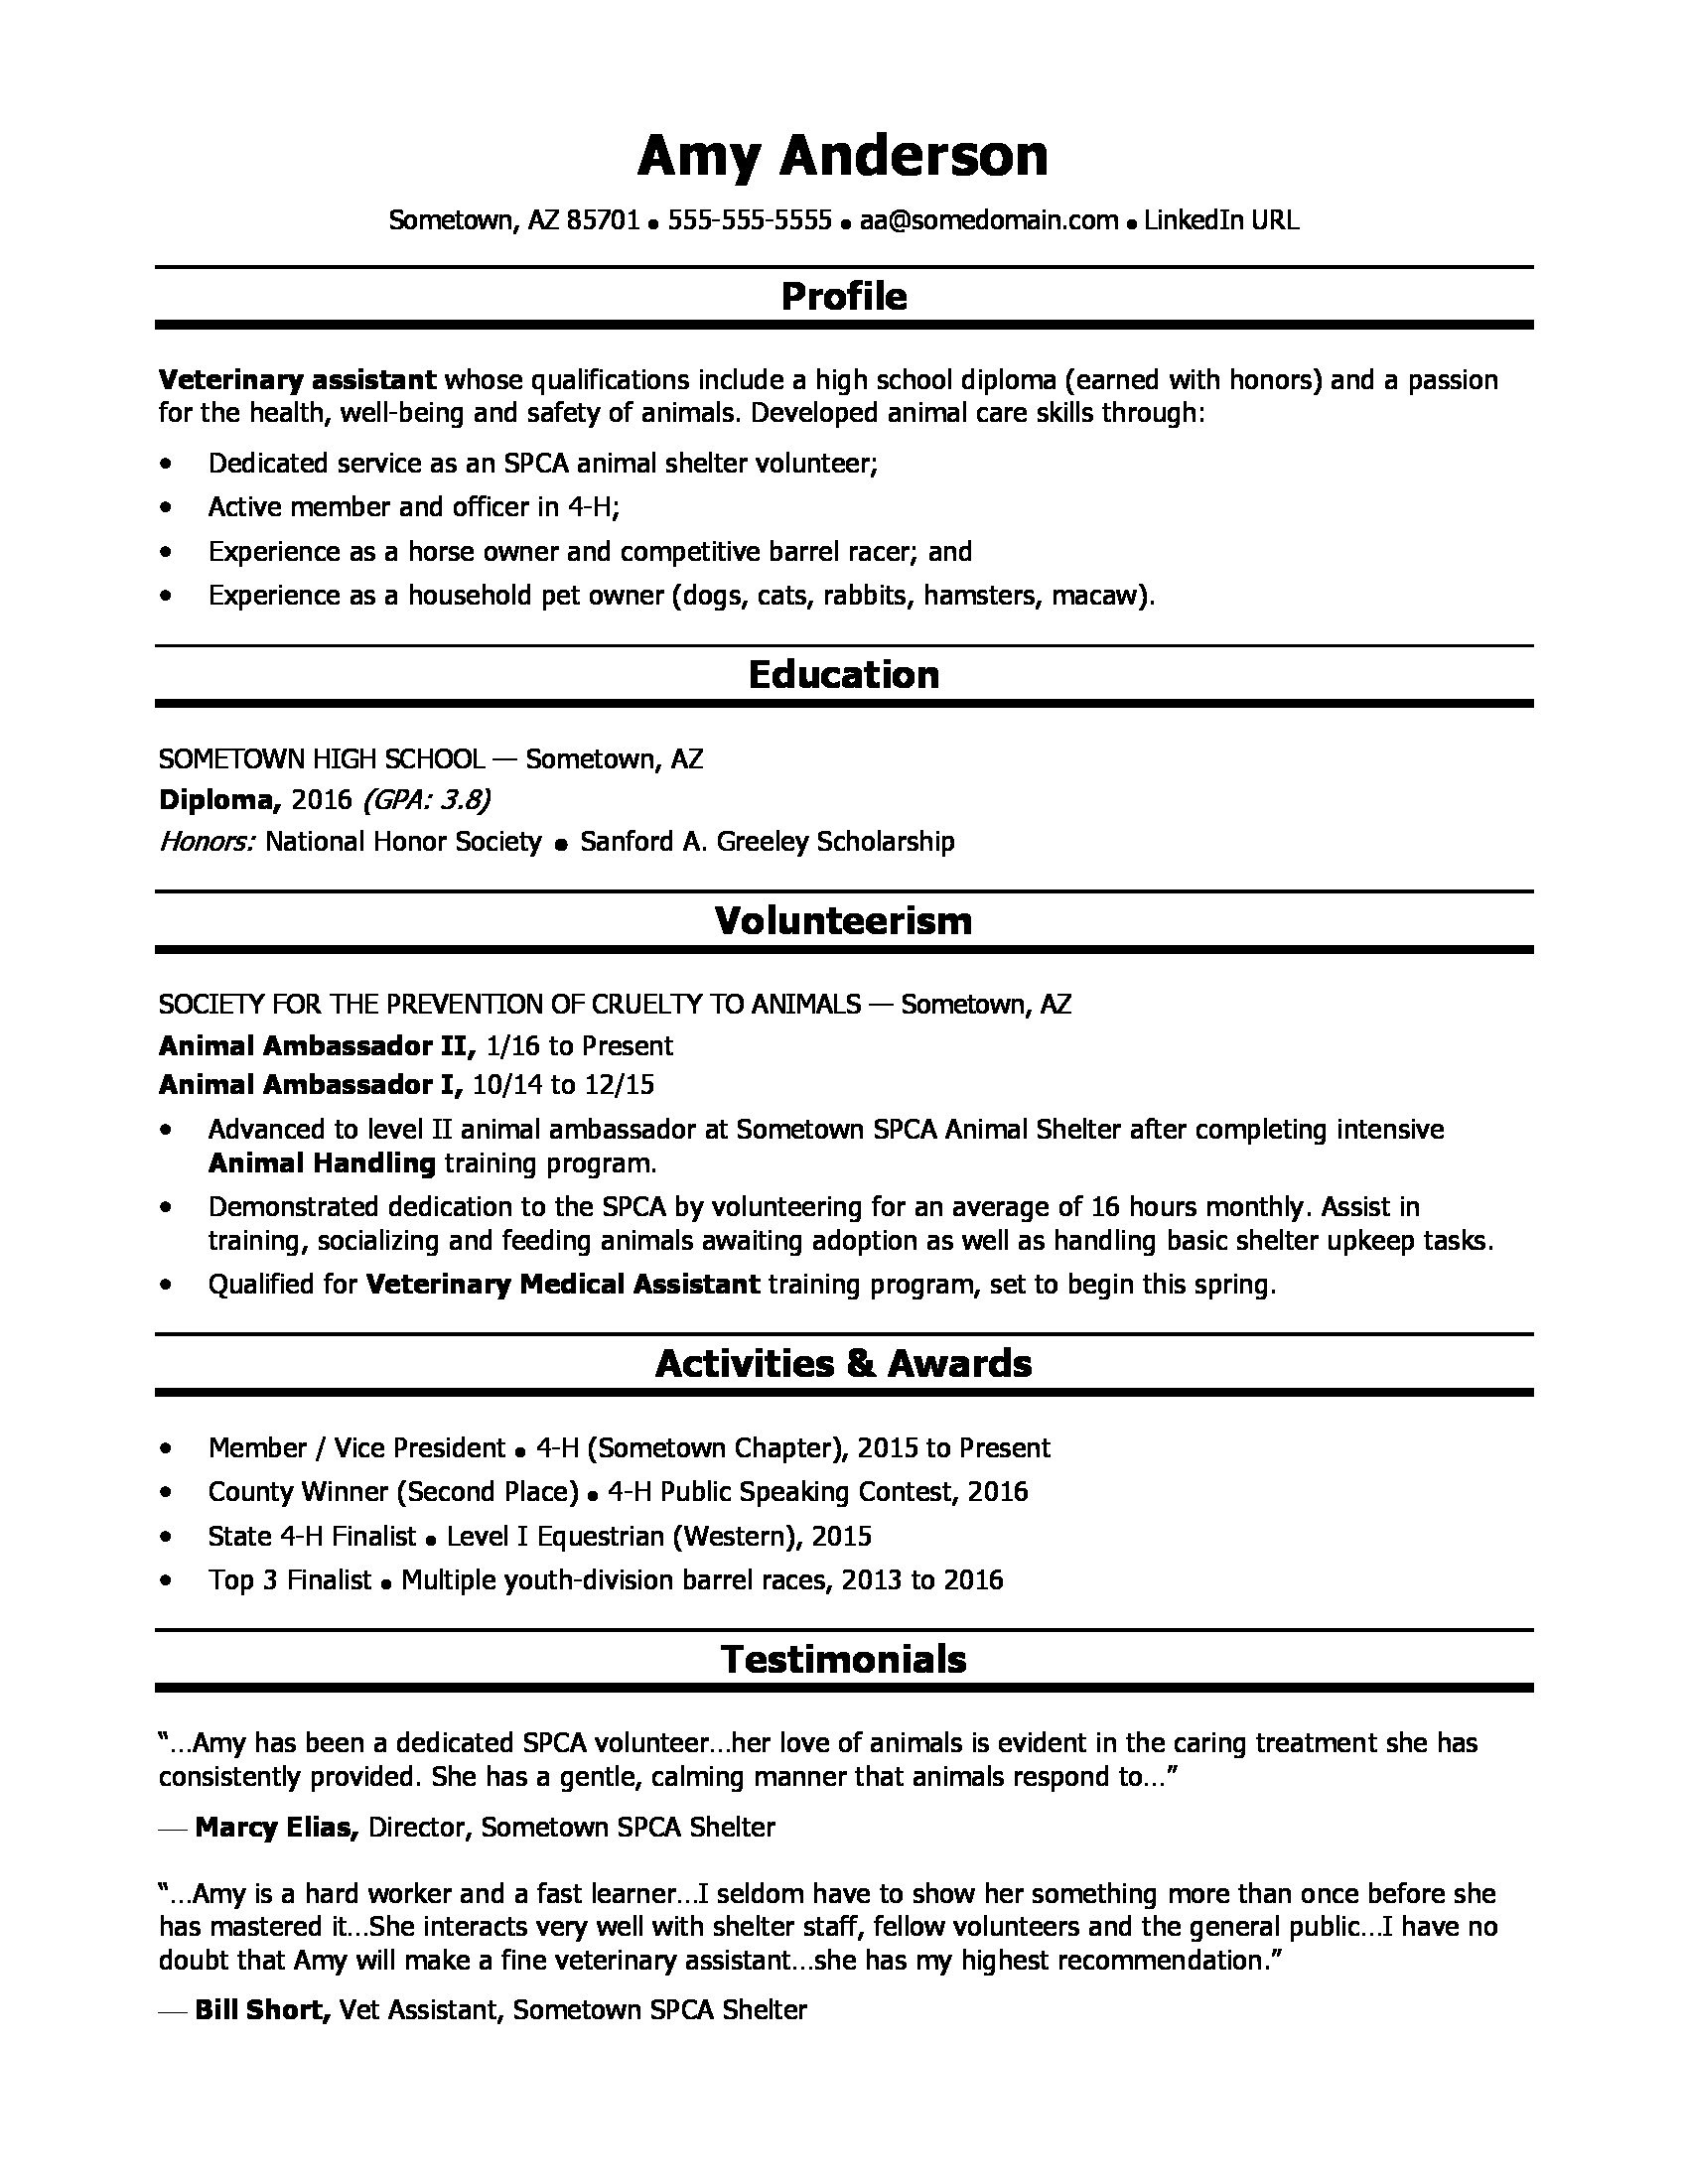 Sample Resume for Veterinary assistant with No Experience High School Grad Resume Sample Monster.com